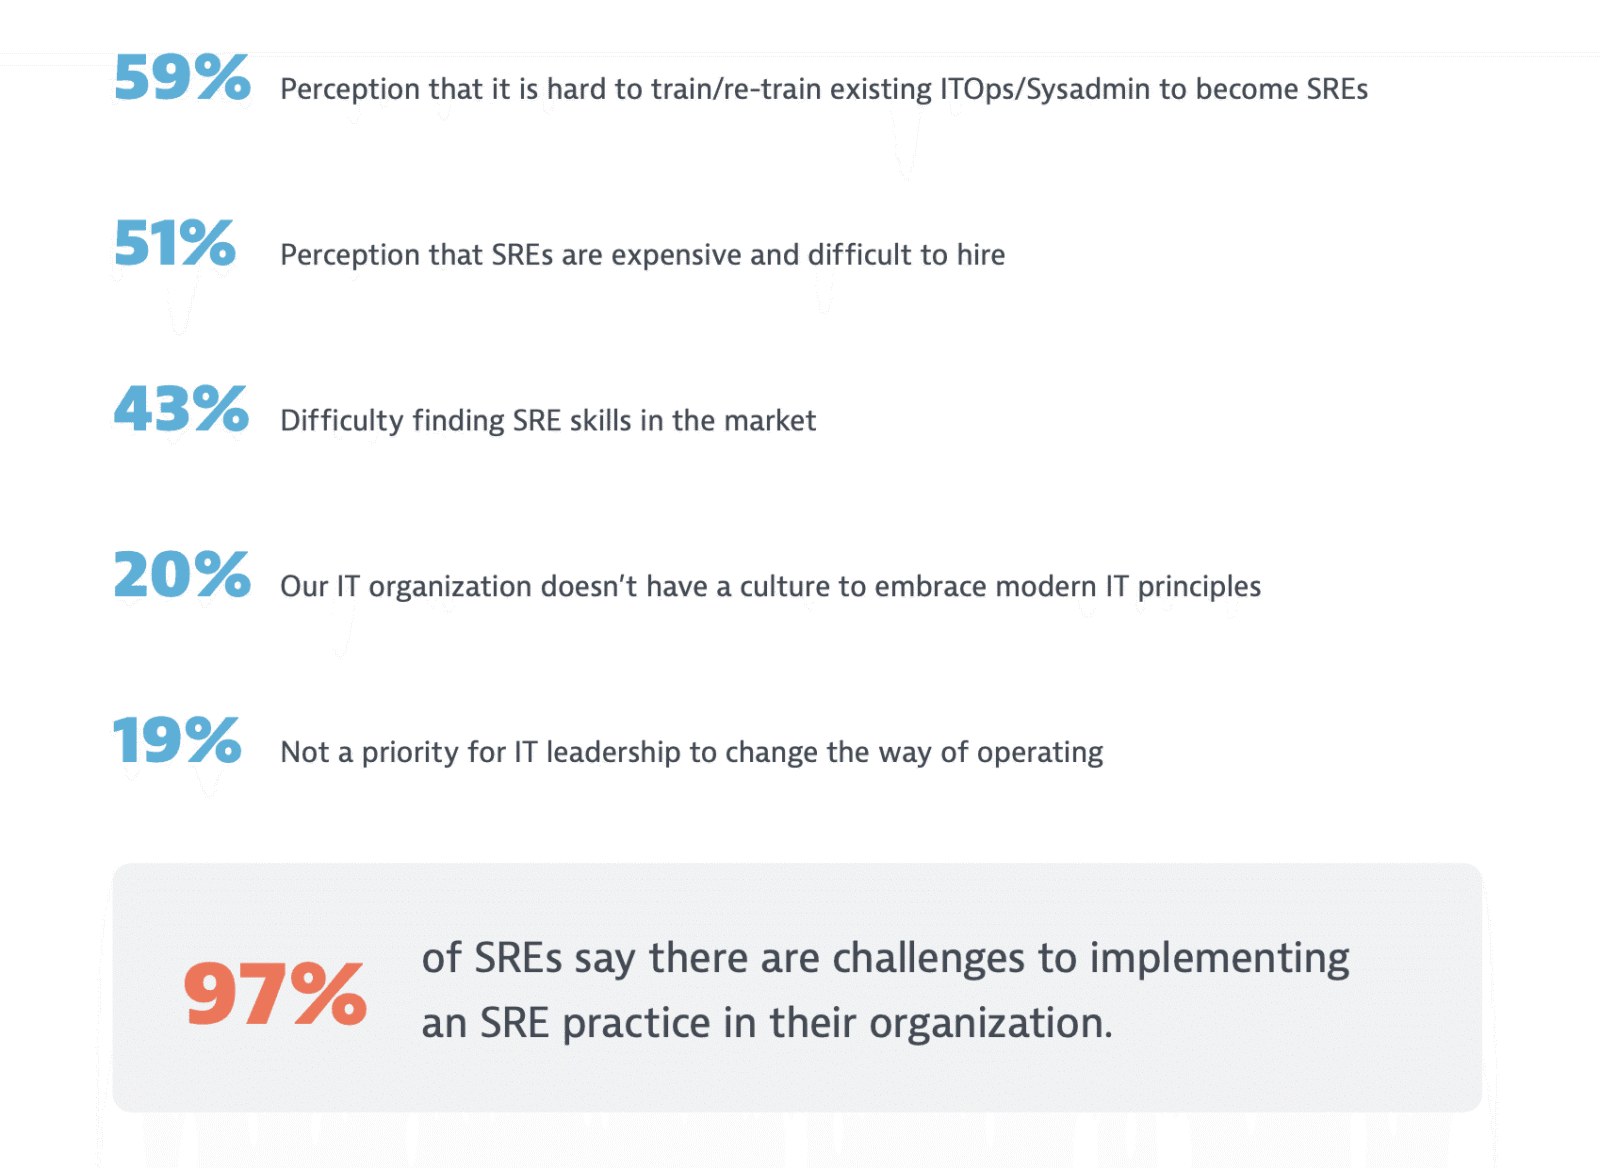 challenges to implementing an SRE practice across your organization